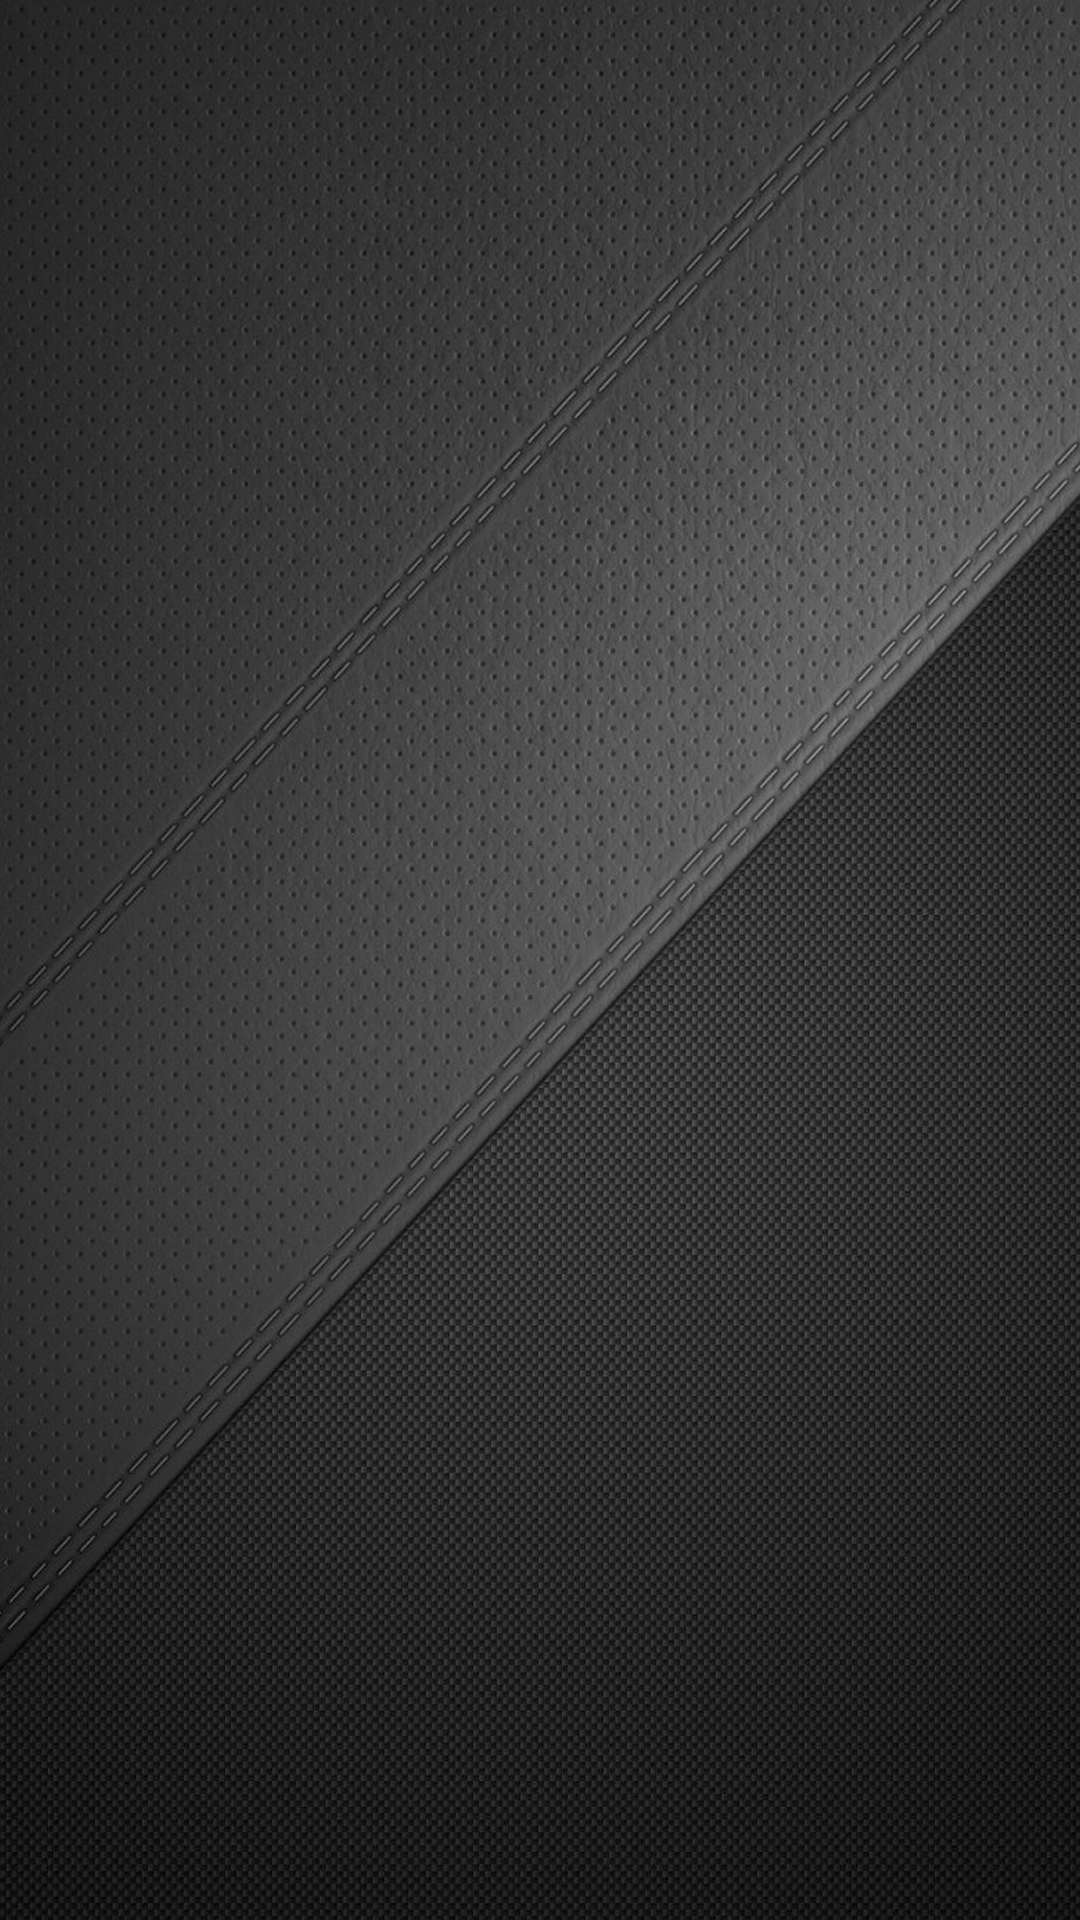 Free Download Perforated Leather Texture Dark Android Wallpaper 1080x19 For Your Desktop Mobile Tablet Explore 72 Android Dark Wallpaper Dark 3d Desktop Hd Wallpaper Dark Phone Wallpaper Dark Theme Wallpaper